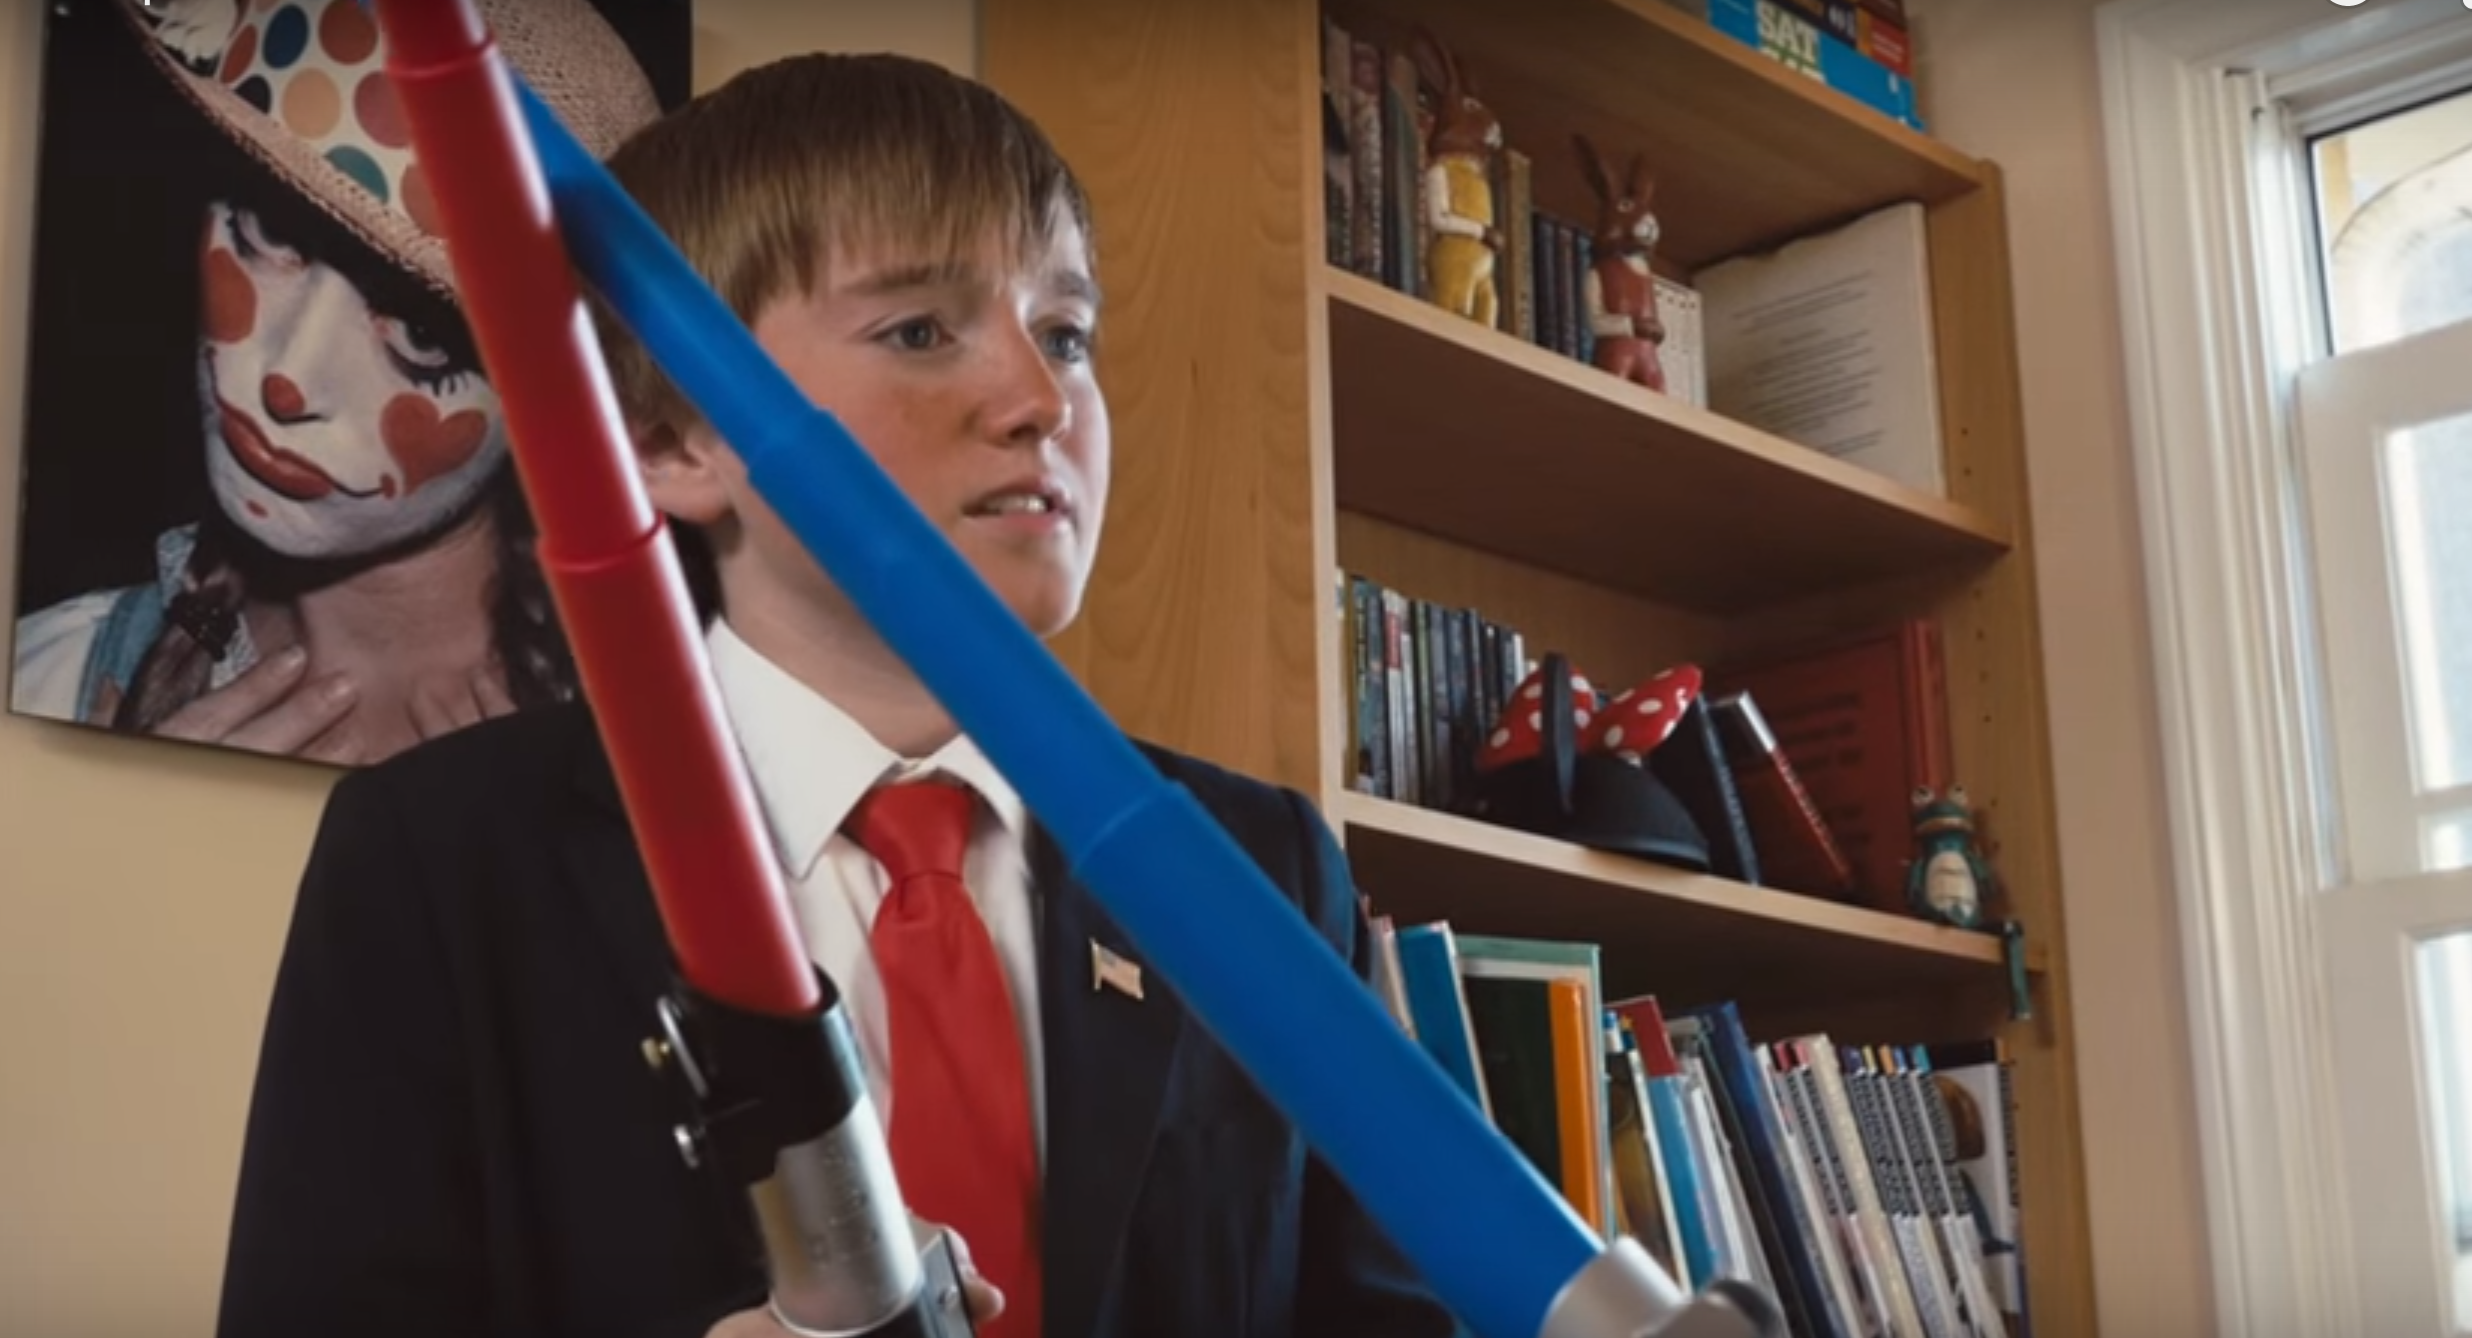 'Trump Kid' Plays With Lightsabers 